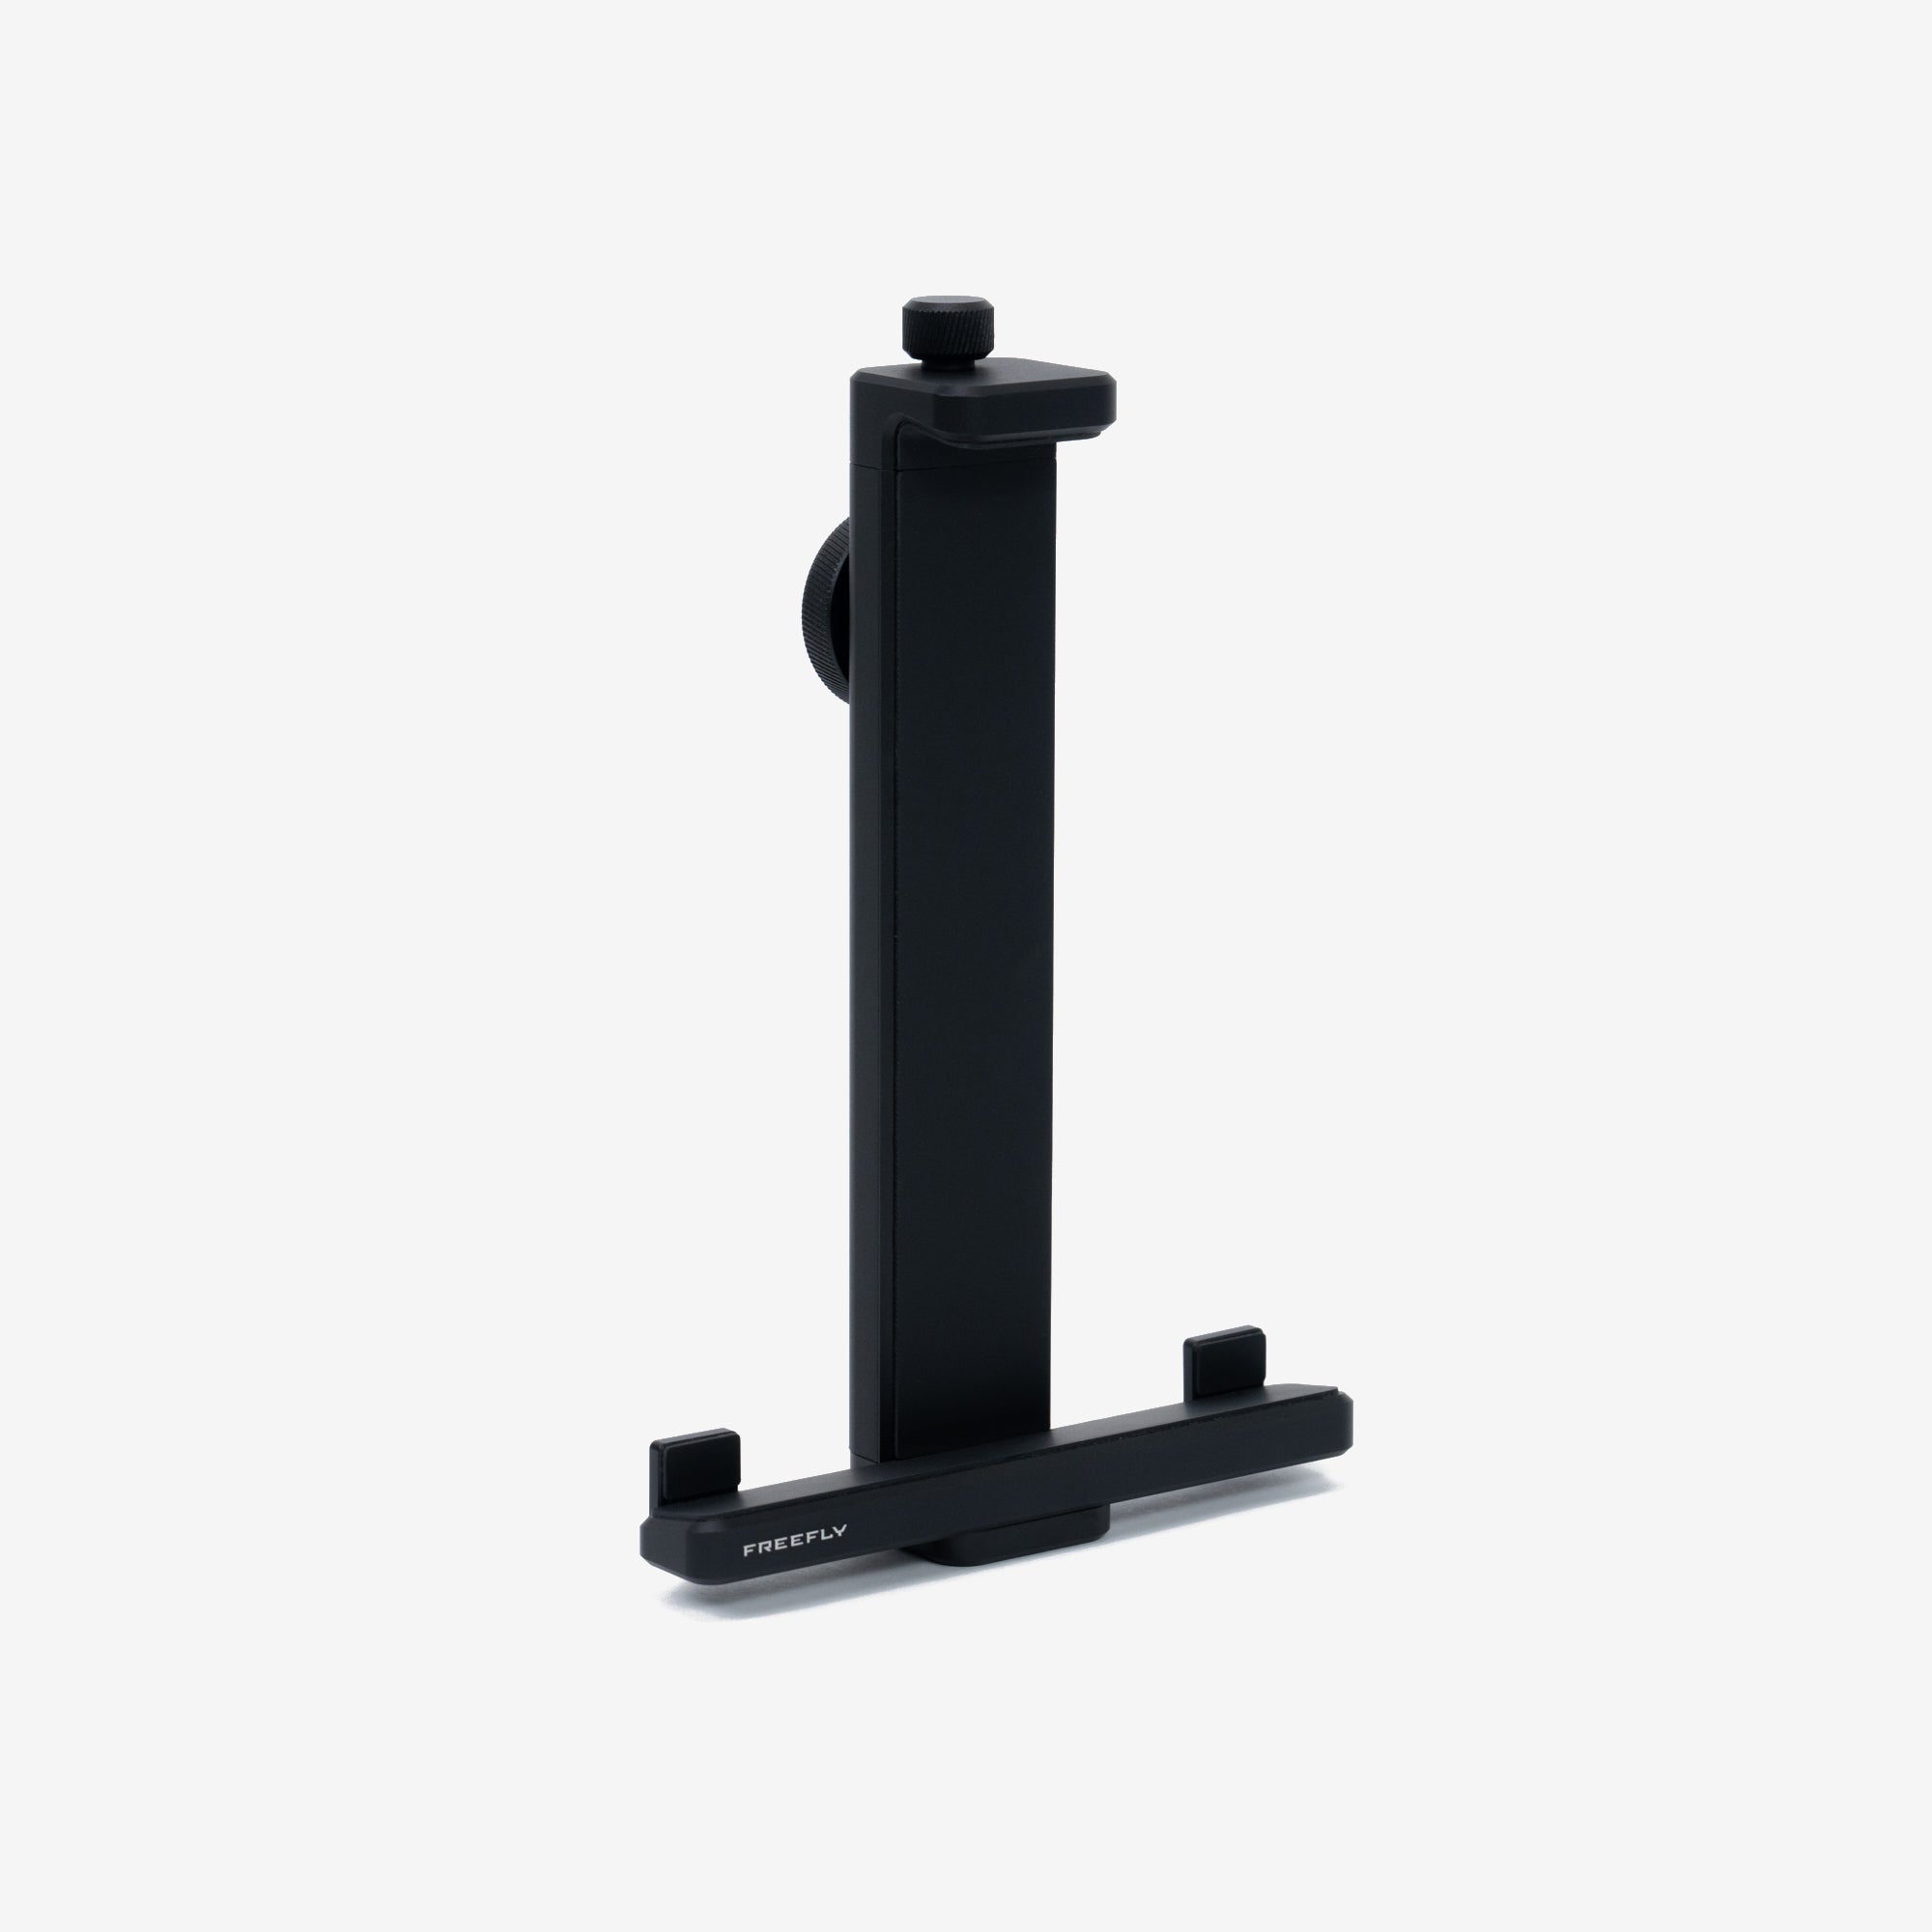 Tablet Clamp Mount